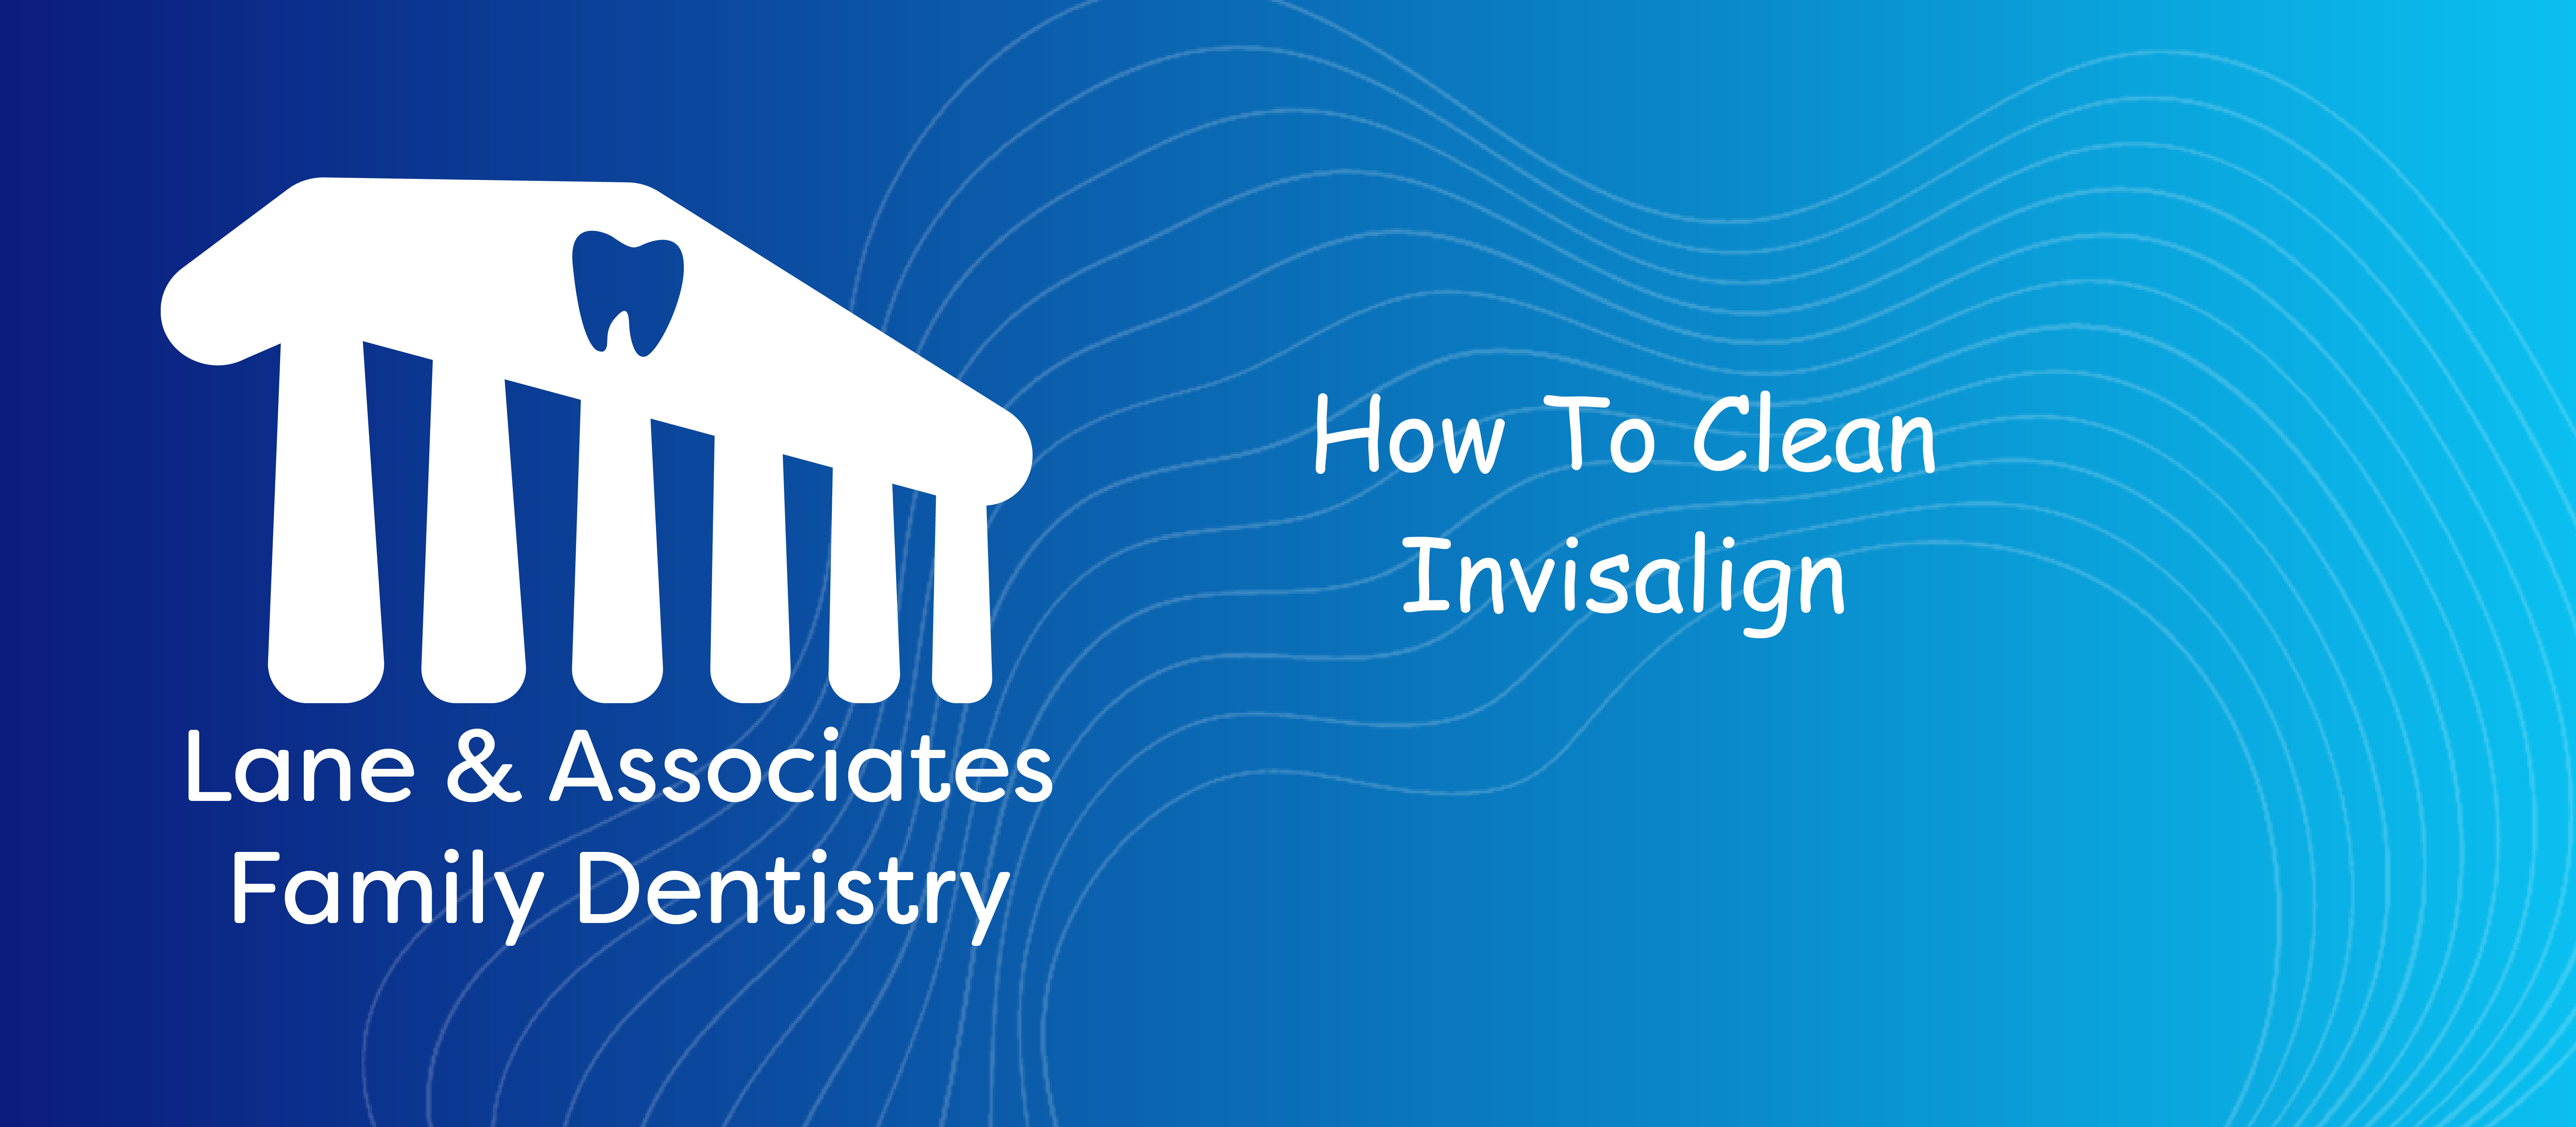 How To Clean Invisalign